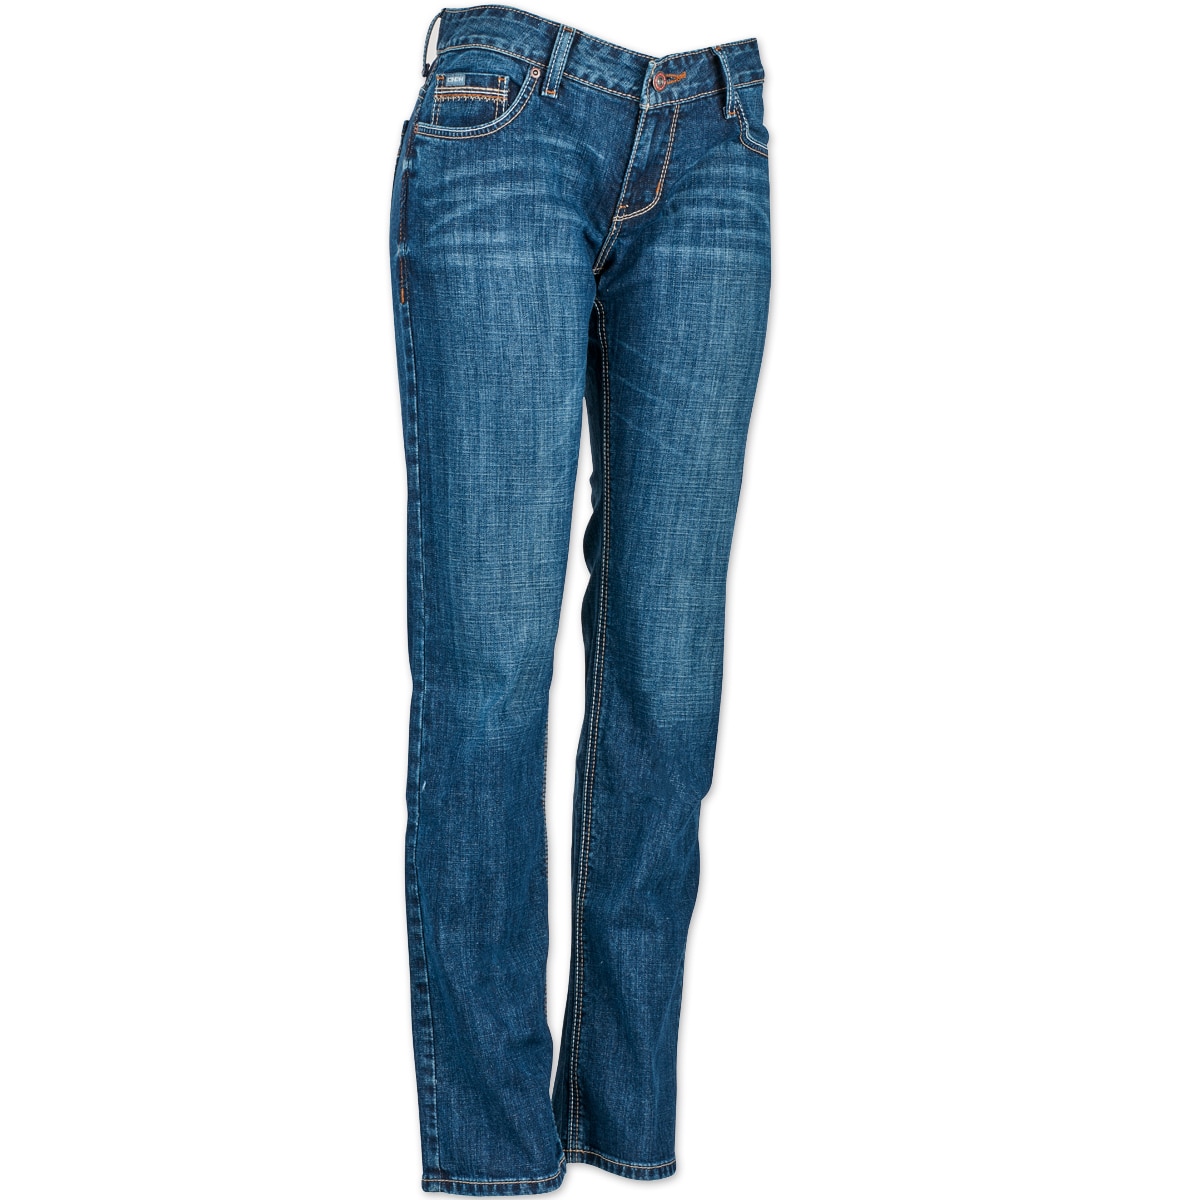 Cinch Women's Ada Mid Rise Relaxed Bootcut Jeans